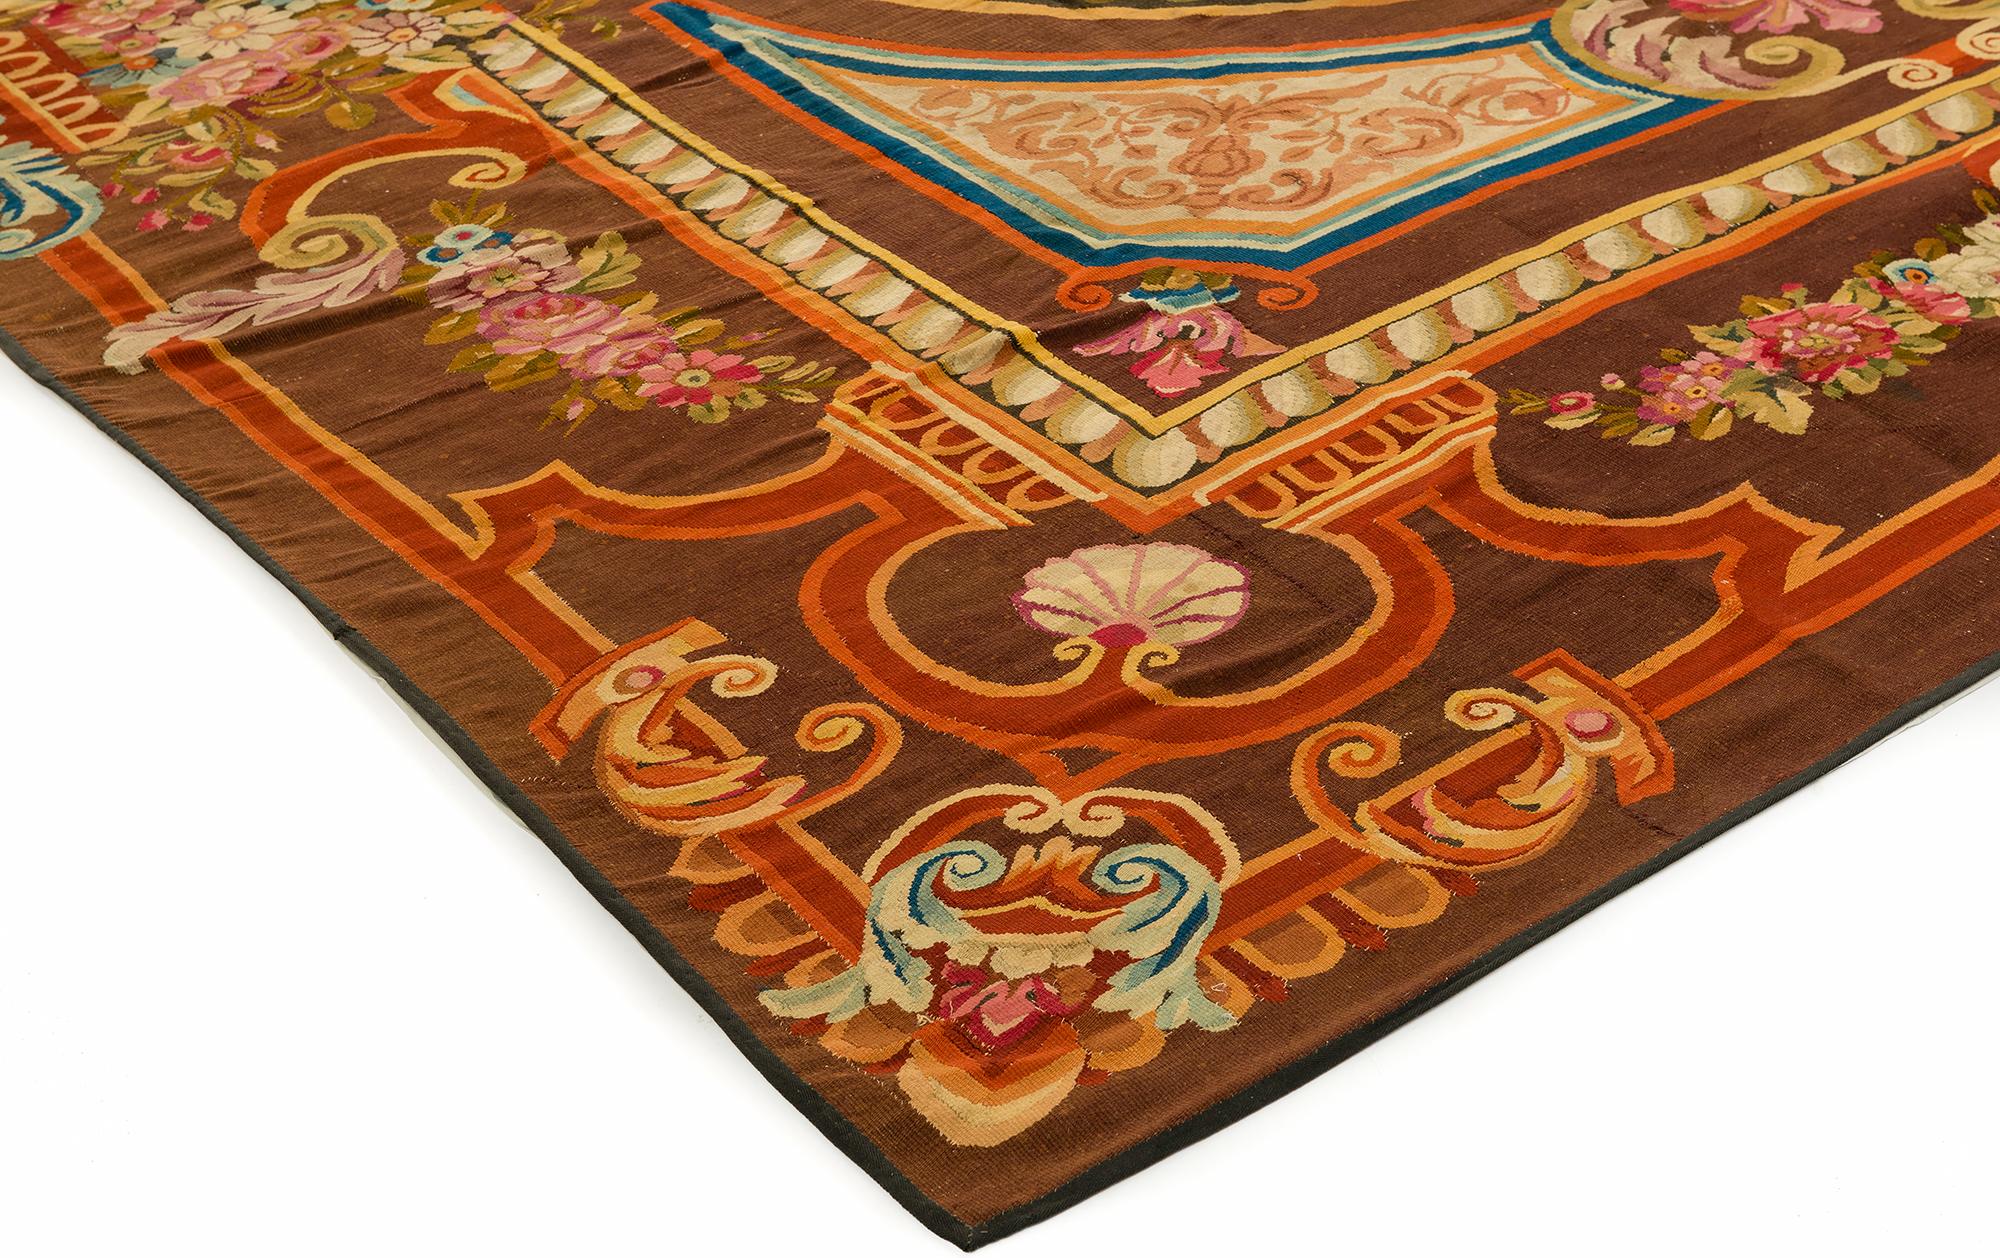 Made during the reign of Louis Philippe in Aubusson France, this elegant rug has a chocolate brown background with a delicate frame of florals and scrolls. The main field has a circular pattern highlighting the center of the rug decorated with a